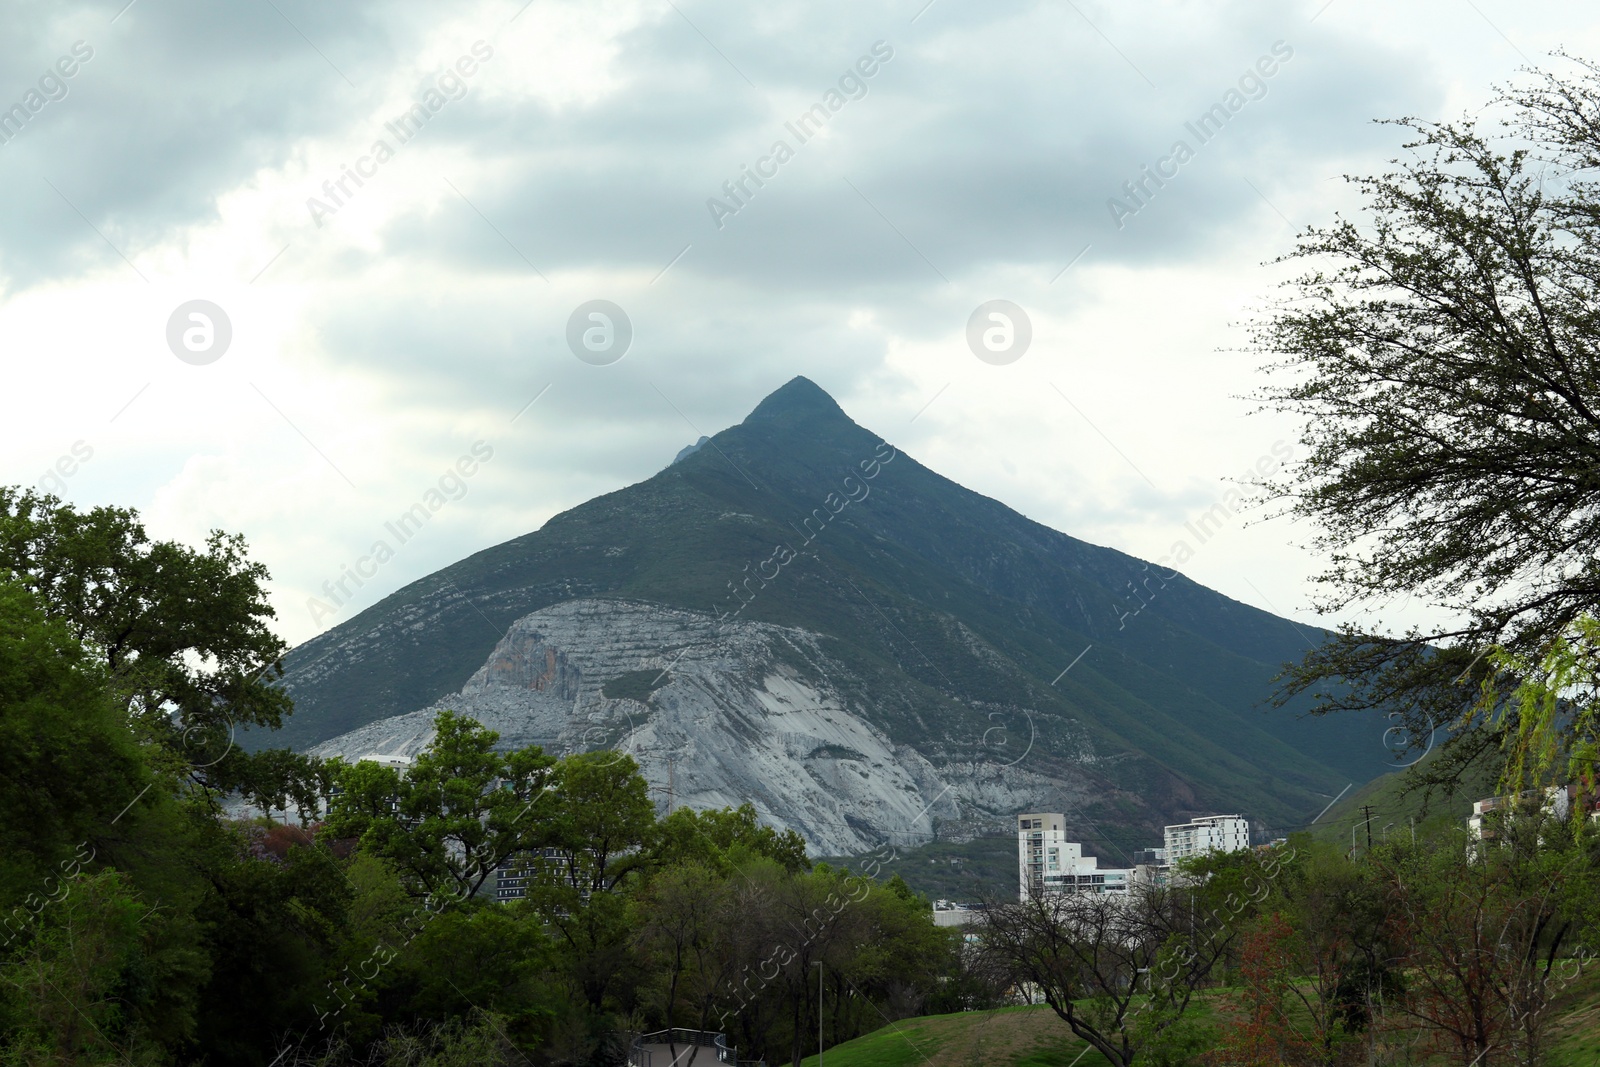 Photo of Picturesque view of beautiful mountain landscape under cloudy sky